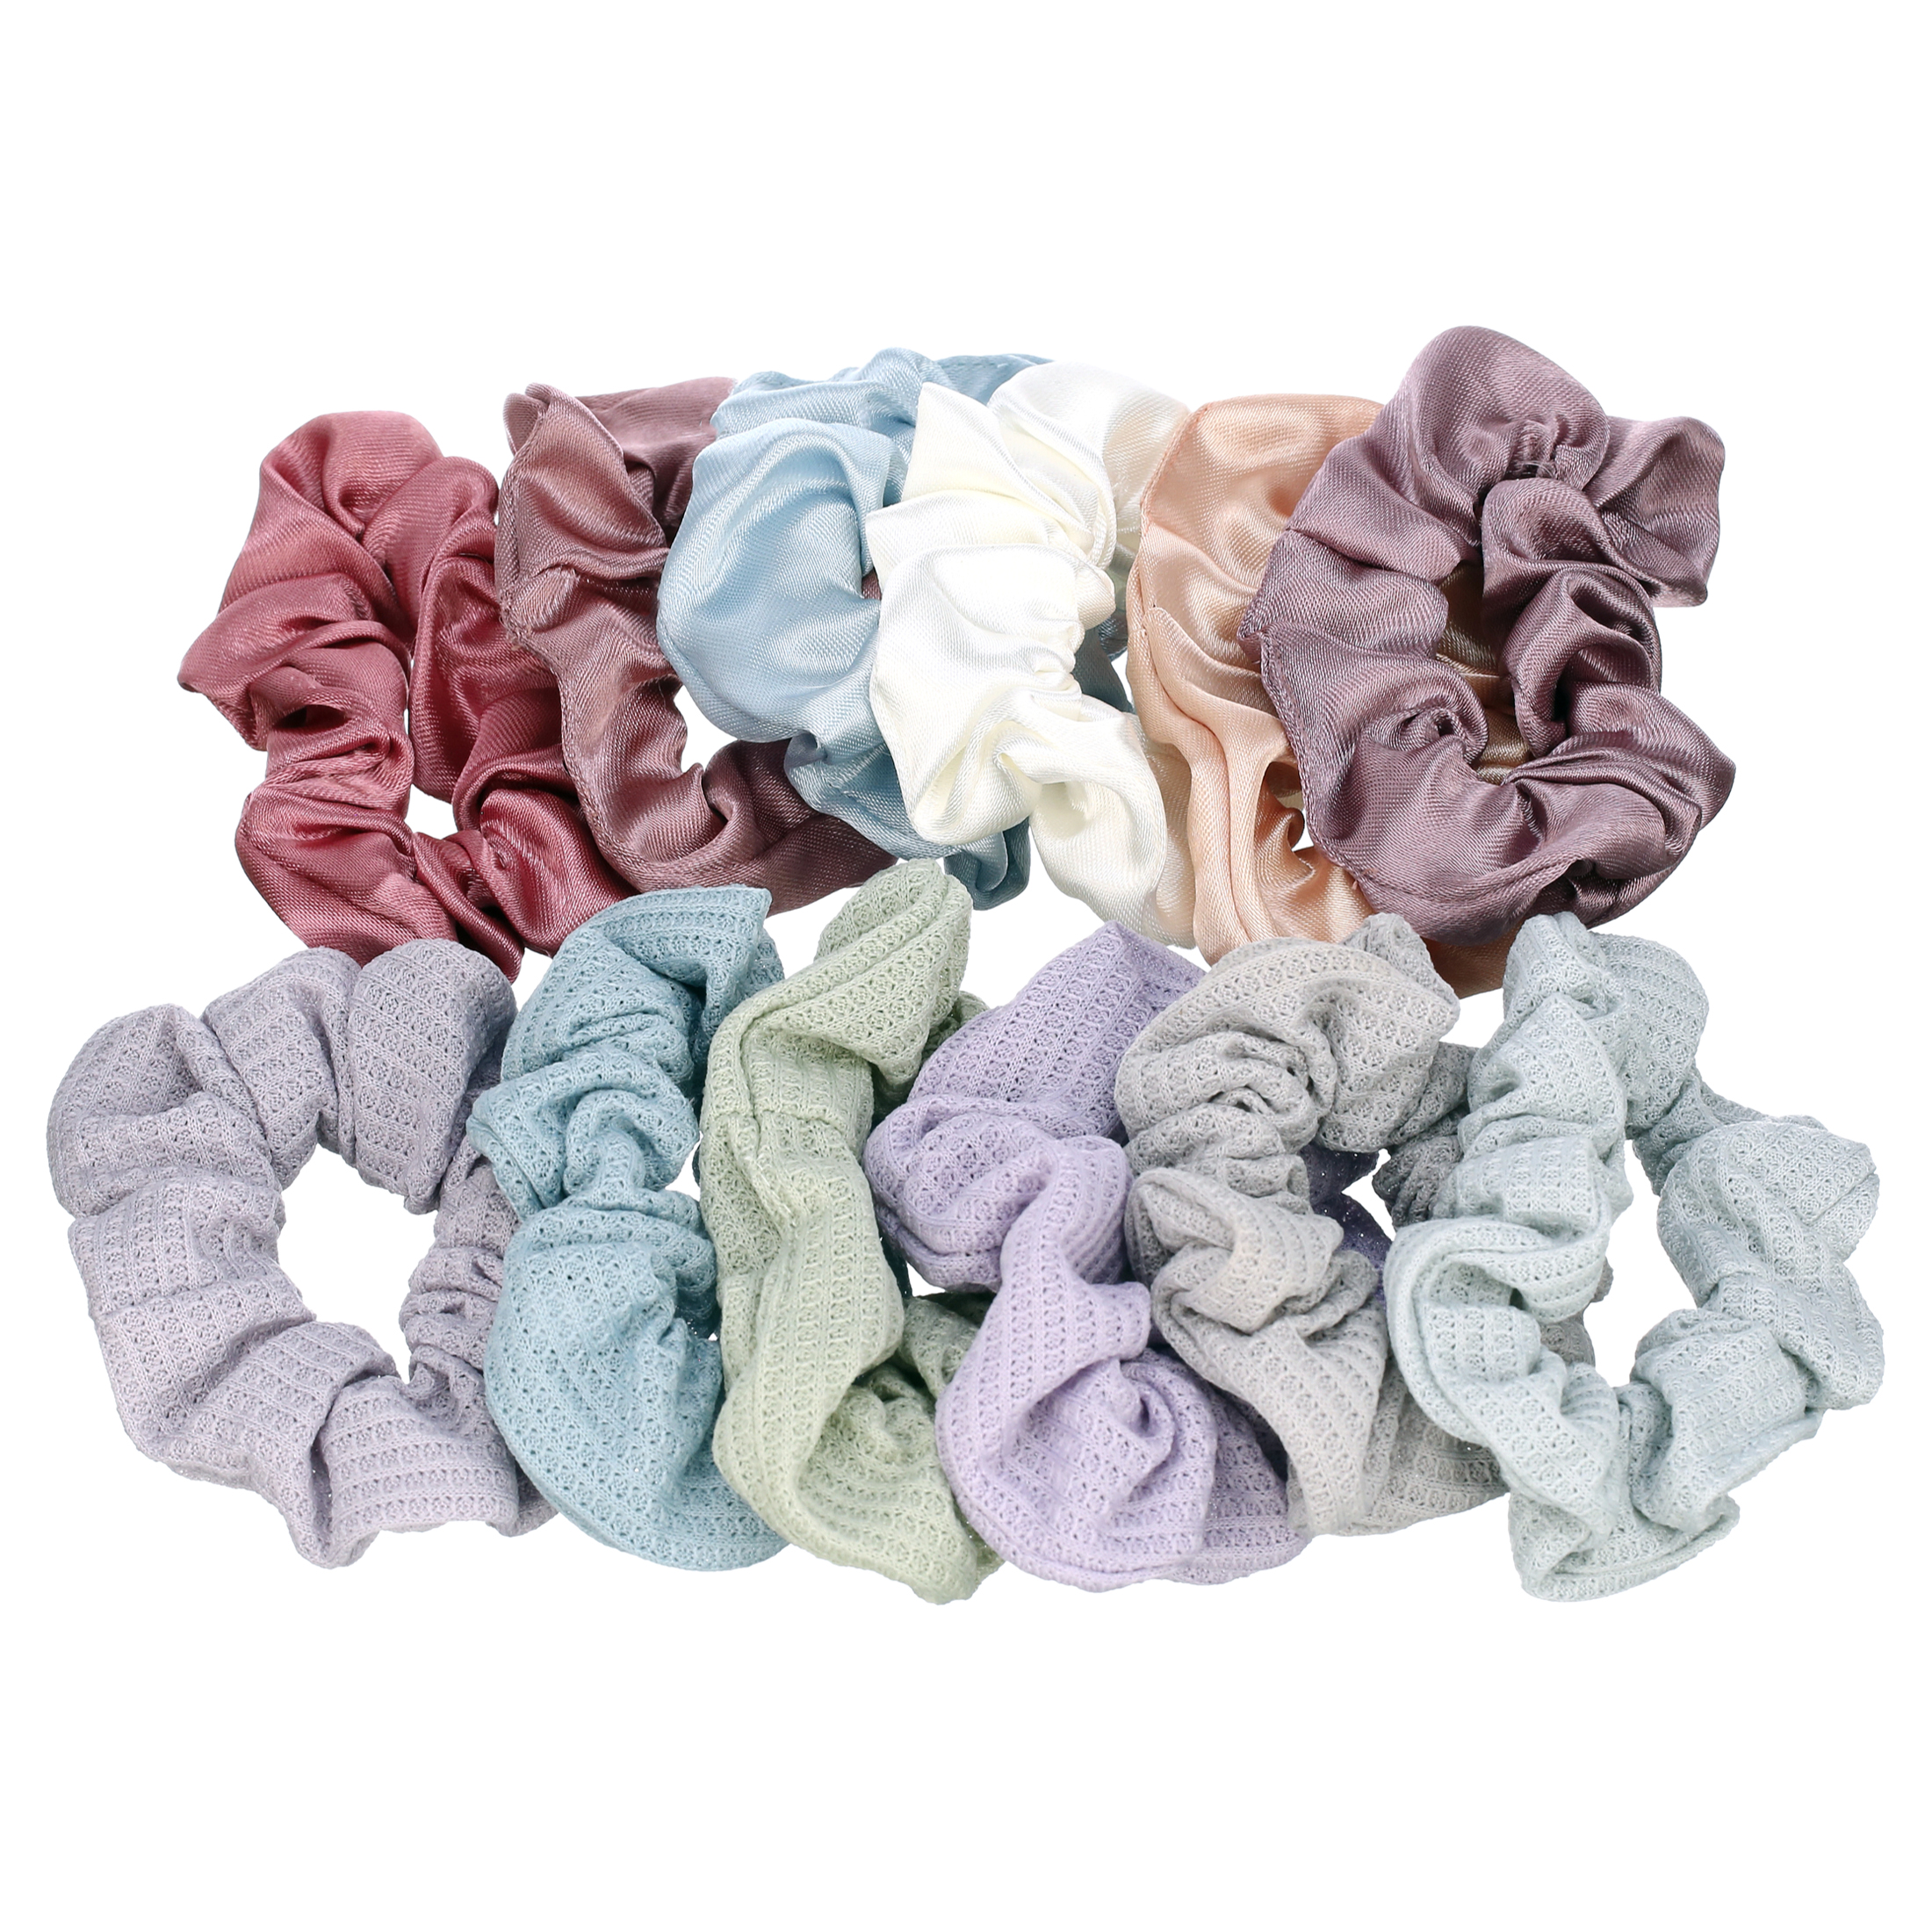 Scunci Scrunchie Hair Ties, Multi-Color, 12 Ct - image 1 of 18